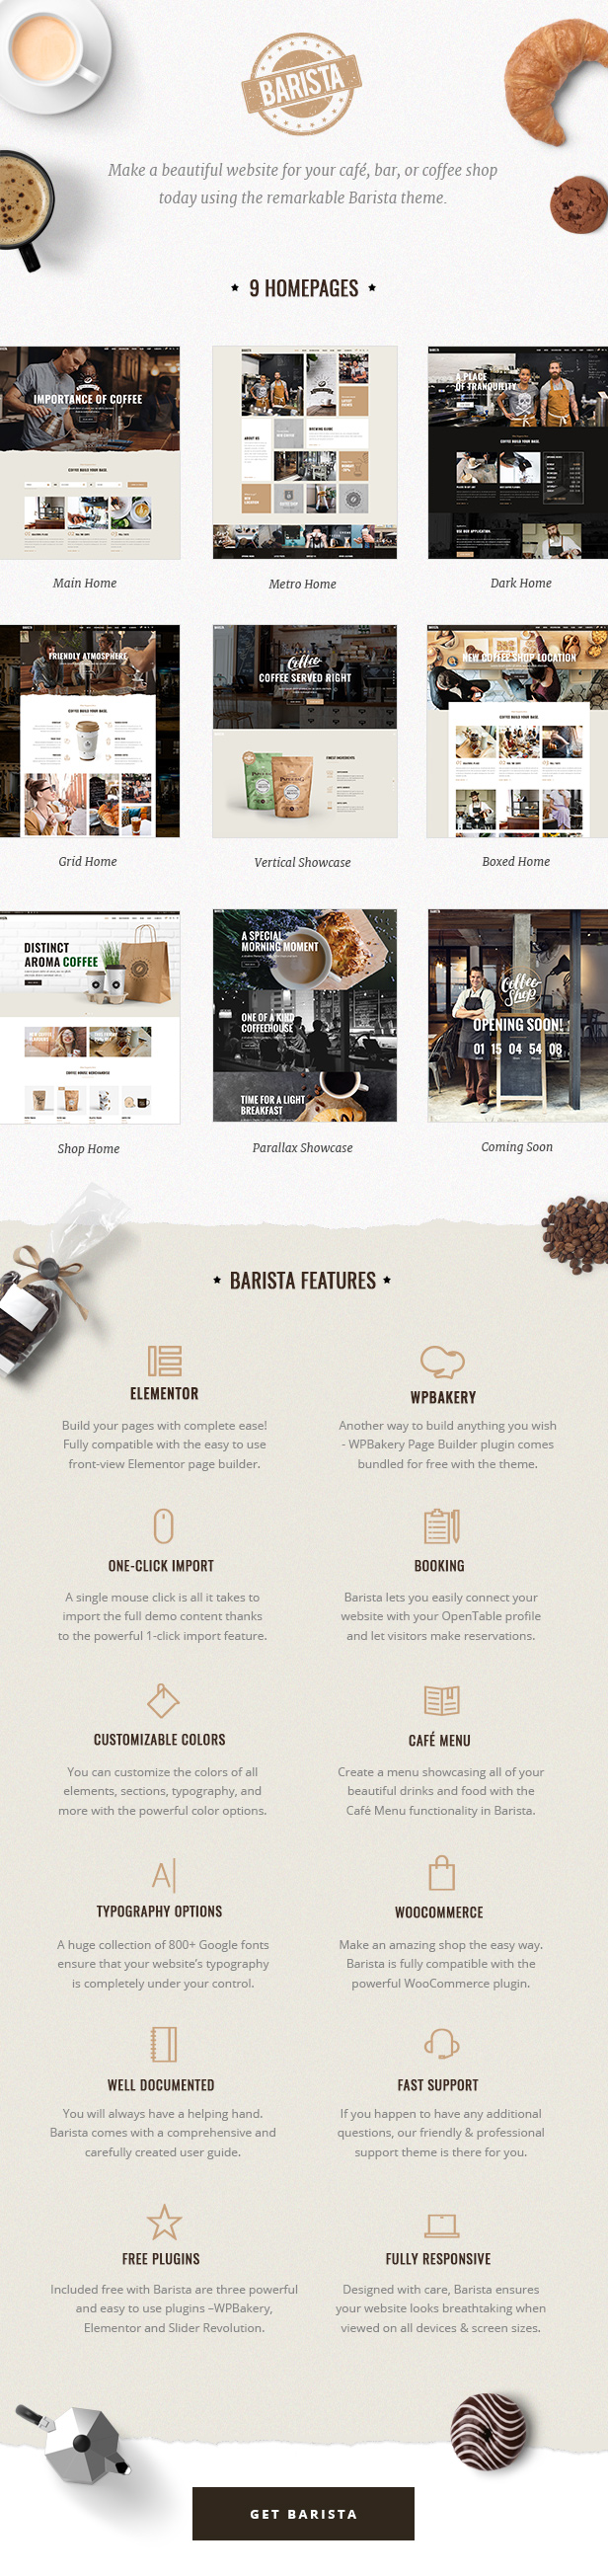 Barista - Modern Theme for Cafes, Coffee Shops and Bars - 1